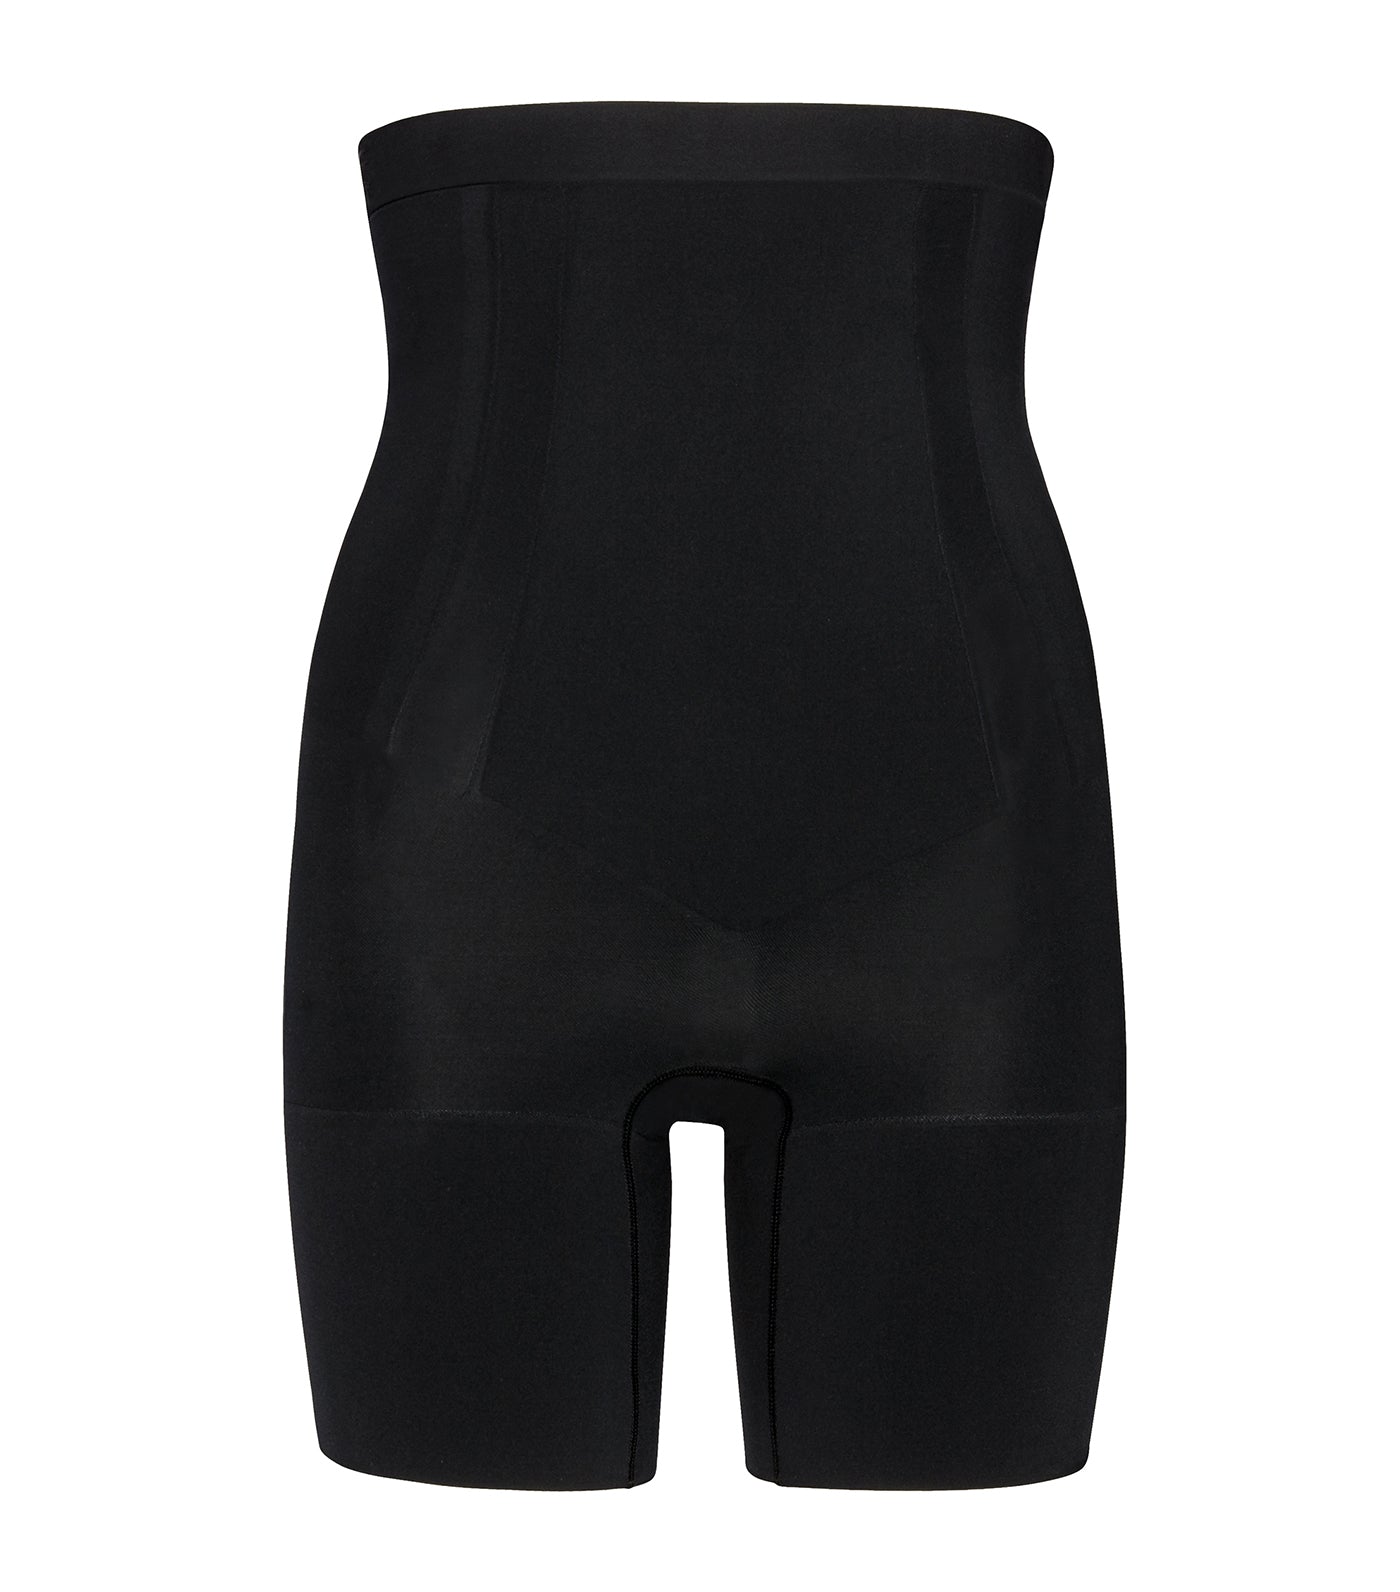 Spanx Assets Higher Power Shaping Shorts S High Waist Thigh Slimming Black